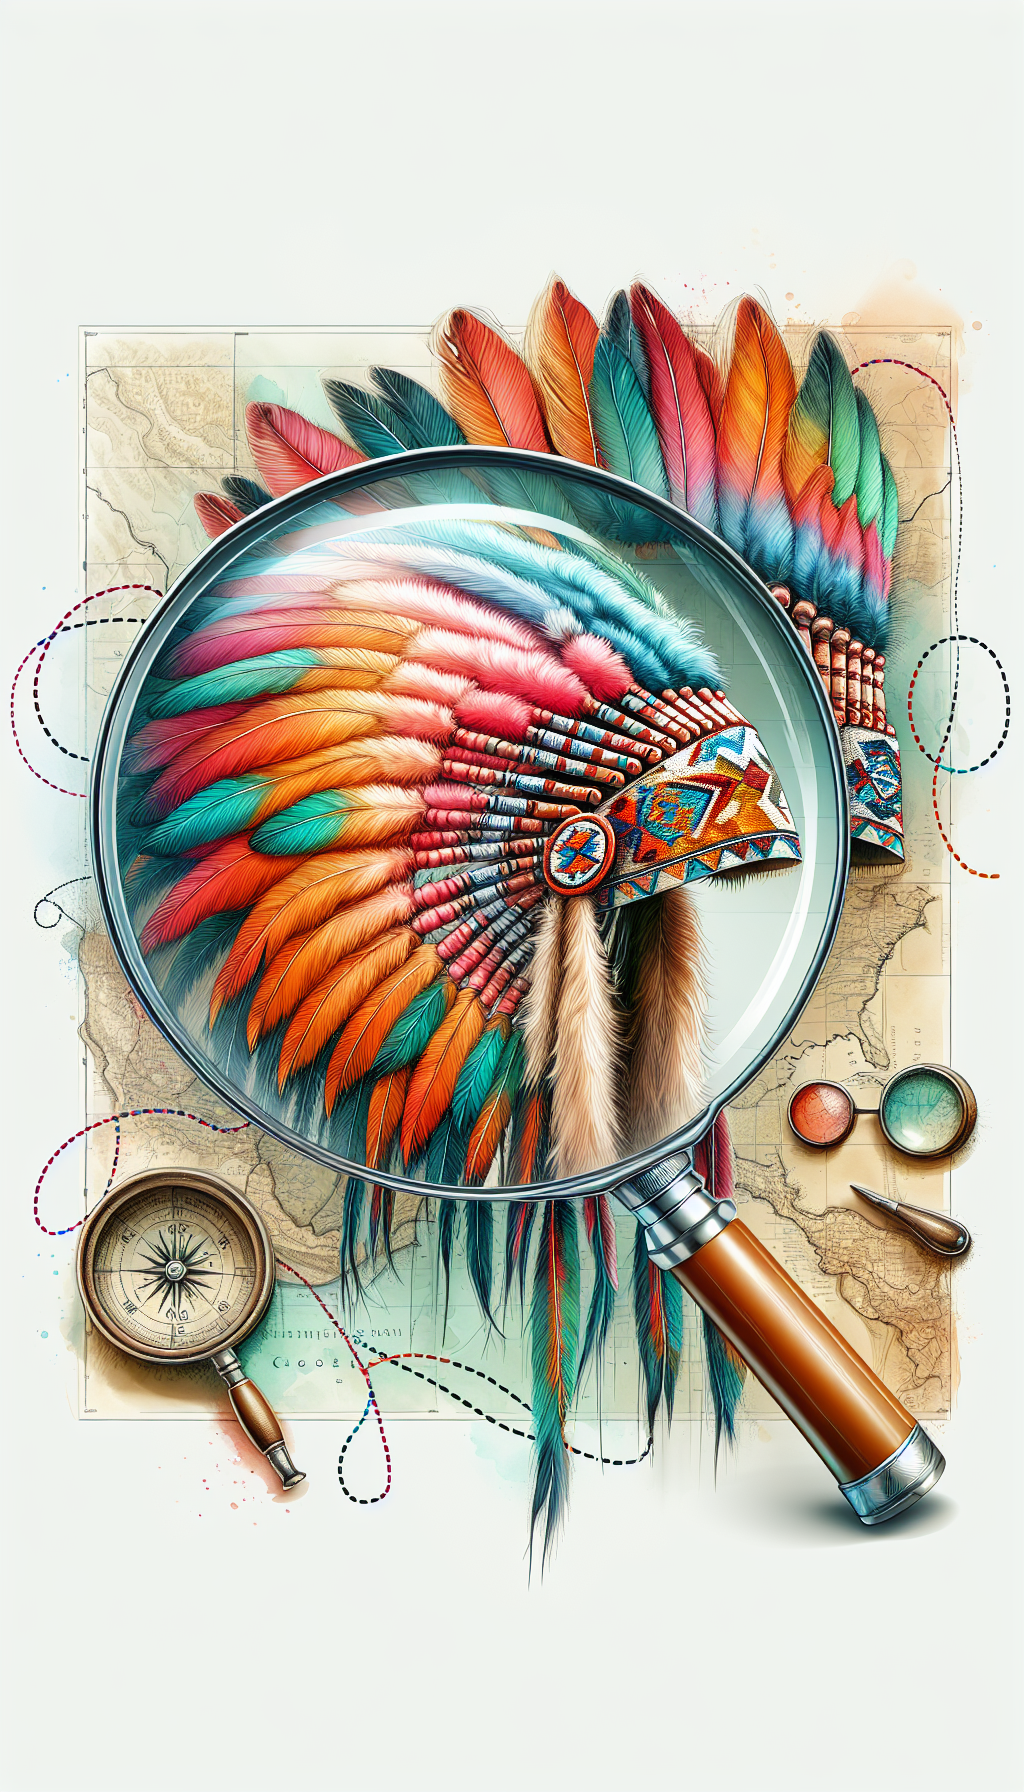 An illustration depicts a close-up of a magnifying glass revealing details on a vibrant Native American headdress, with subtle map icons and dotted lines leading to it, symbolizing the journey to a nearby appraisal. The image style is a blend of crisp realism for the headdress under the glass, and soft watercolor for the surrounding artifacts and map imagery.